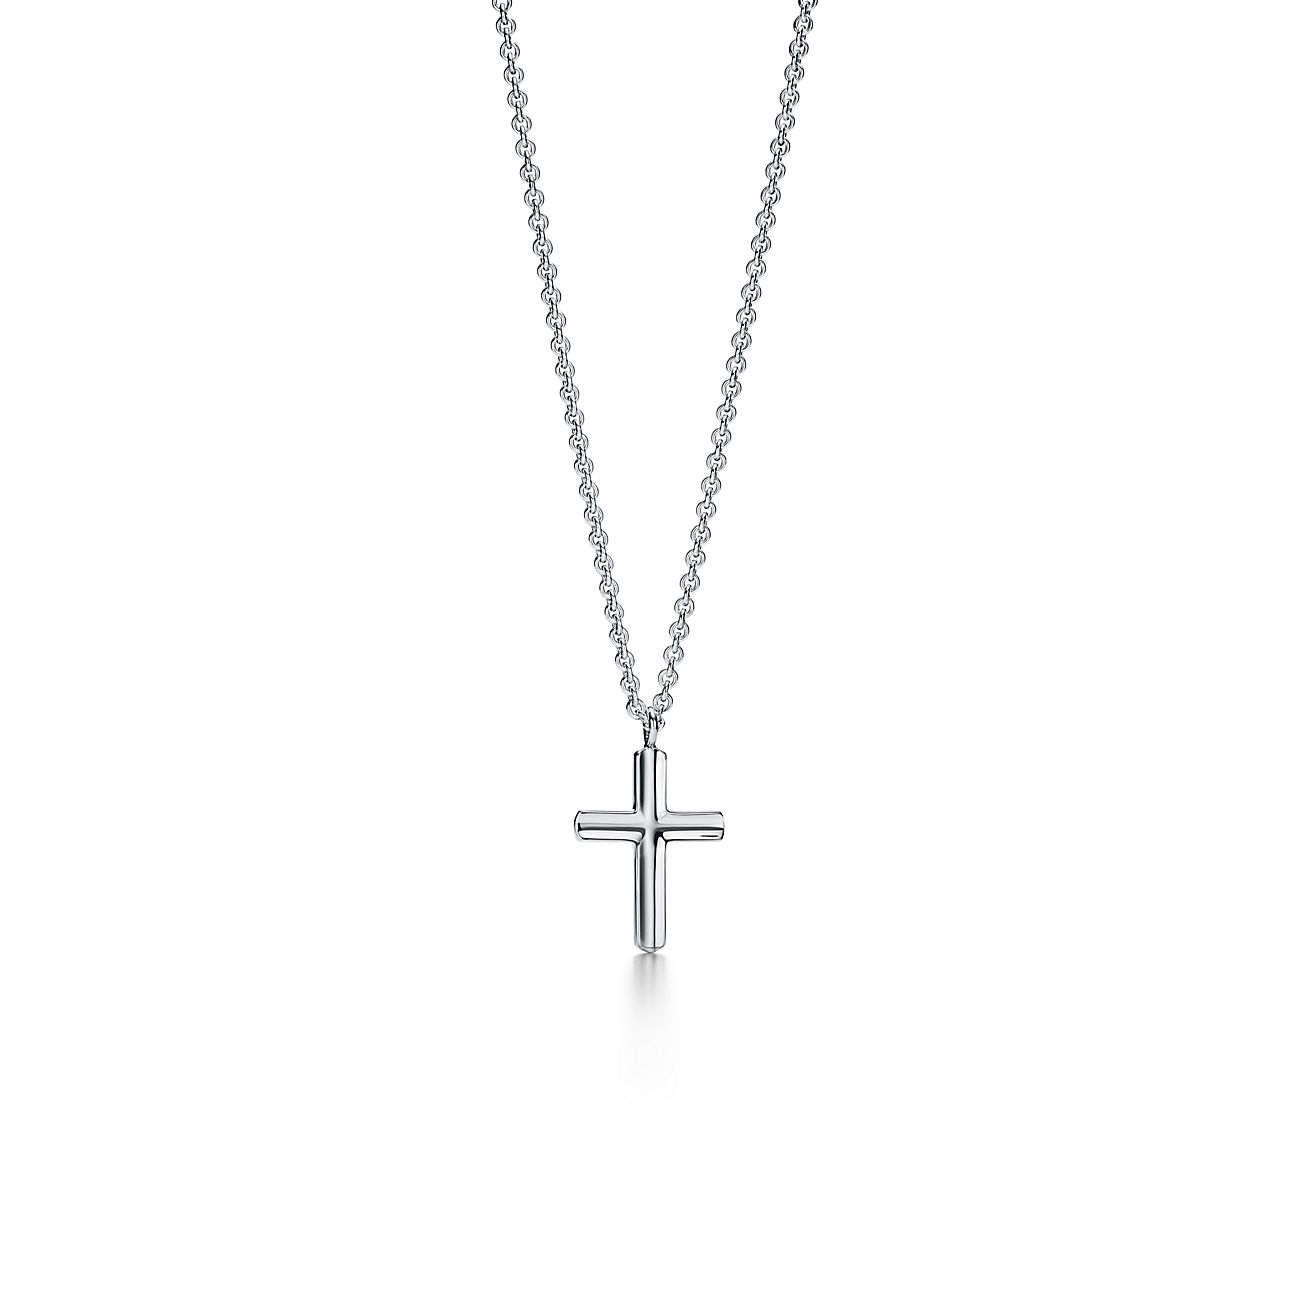 Details about   USA Seller Sideway Cross Ring Sterling Silver 925 Best Price Religious Jewelry 